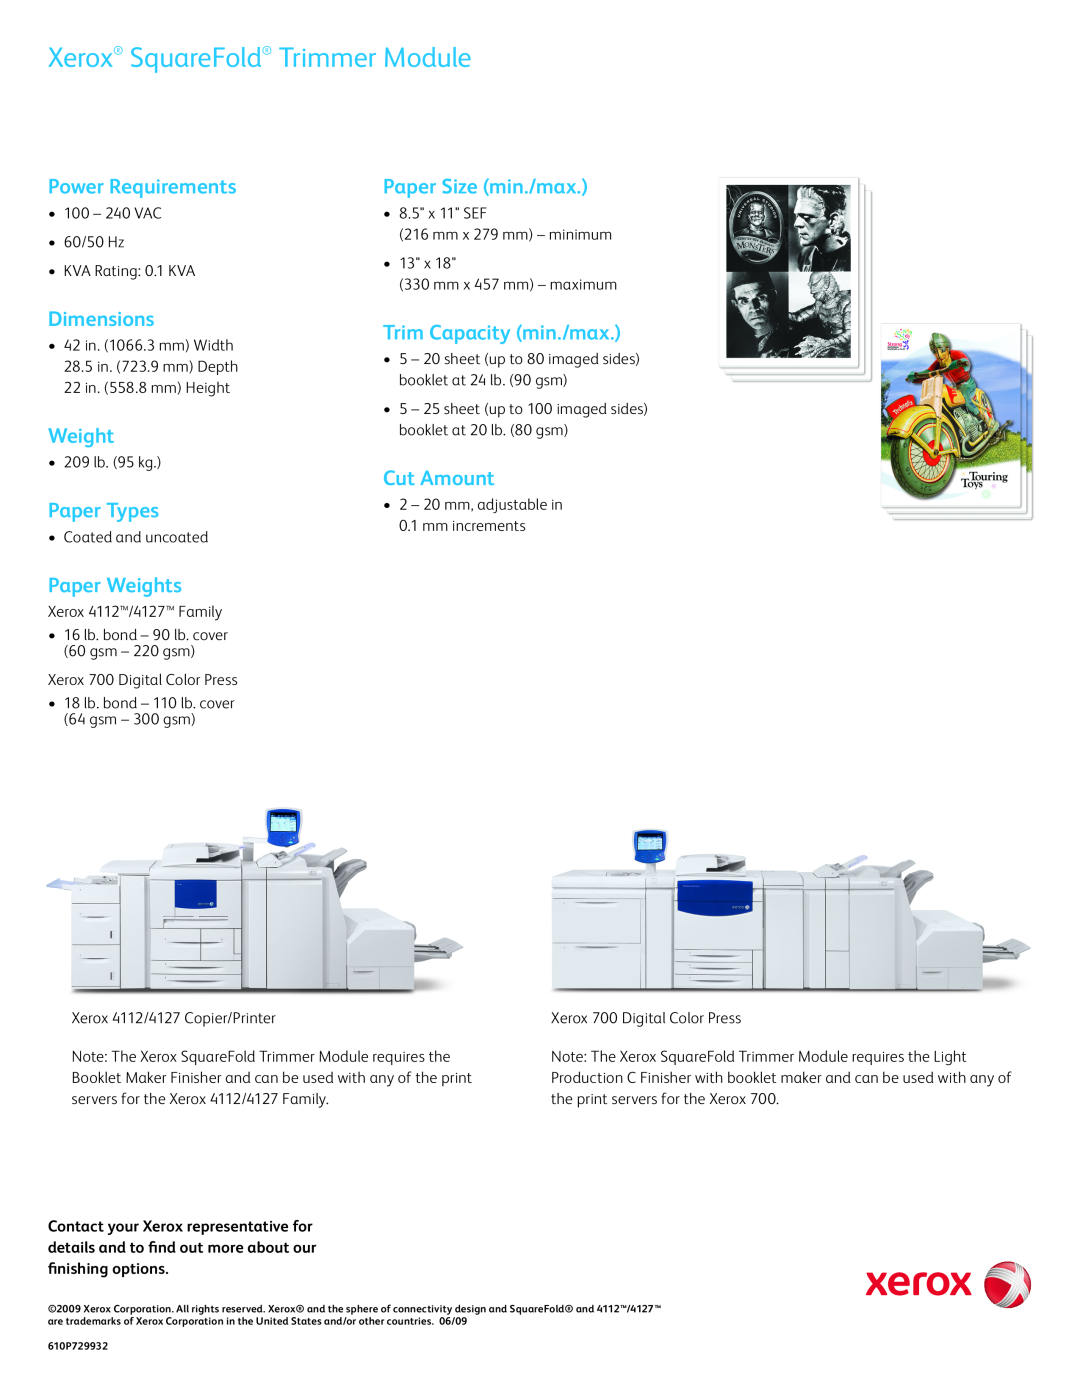 Xerox 610P729932 brochure Power Requirements, Dimensions, Paper Types, Paper Weights, Paper Size min./max, Cut Amount 